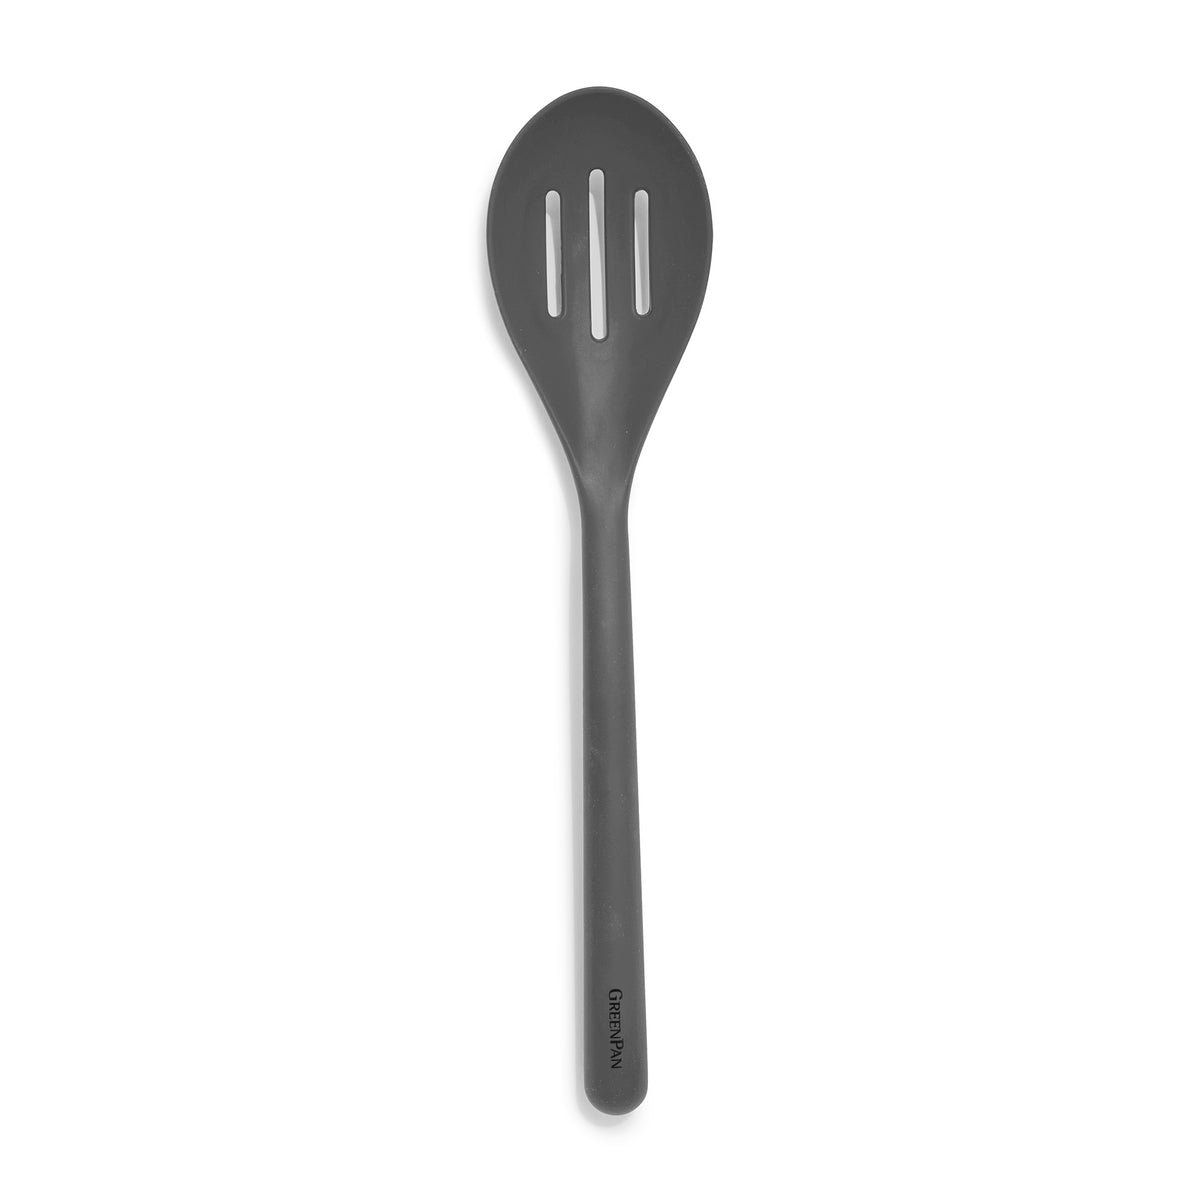 Platinum Silicone Slotted Spoon | Gray